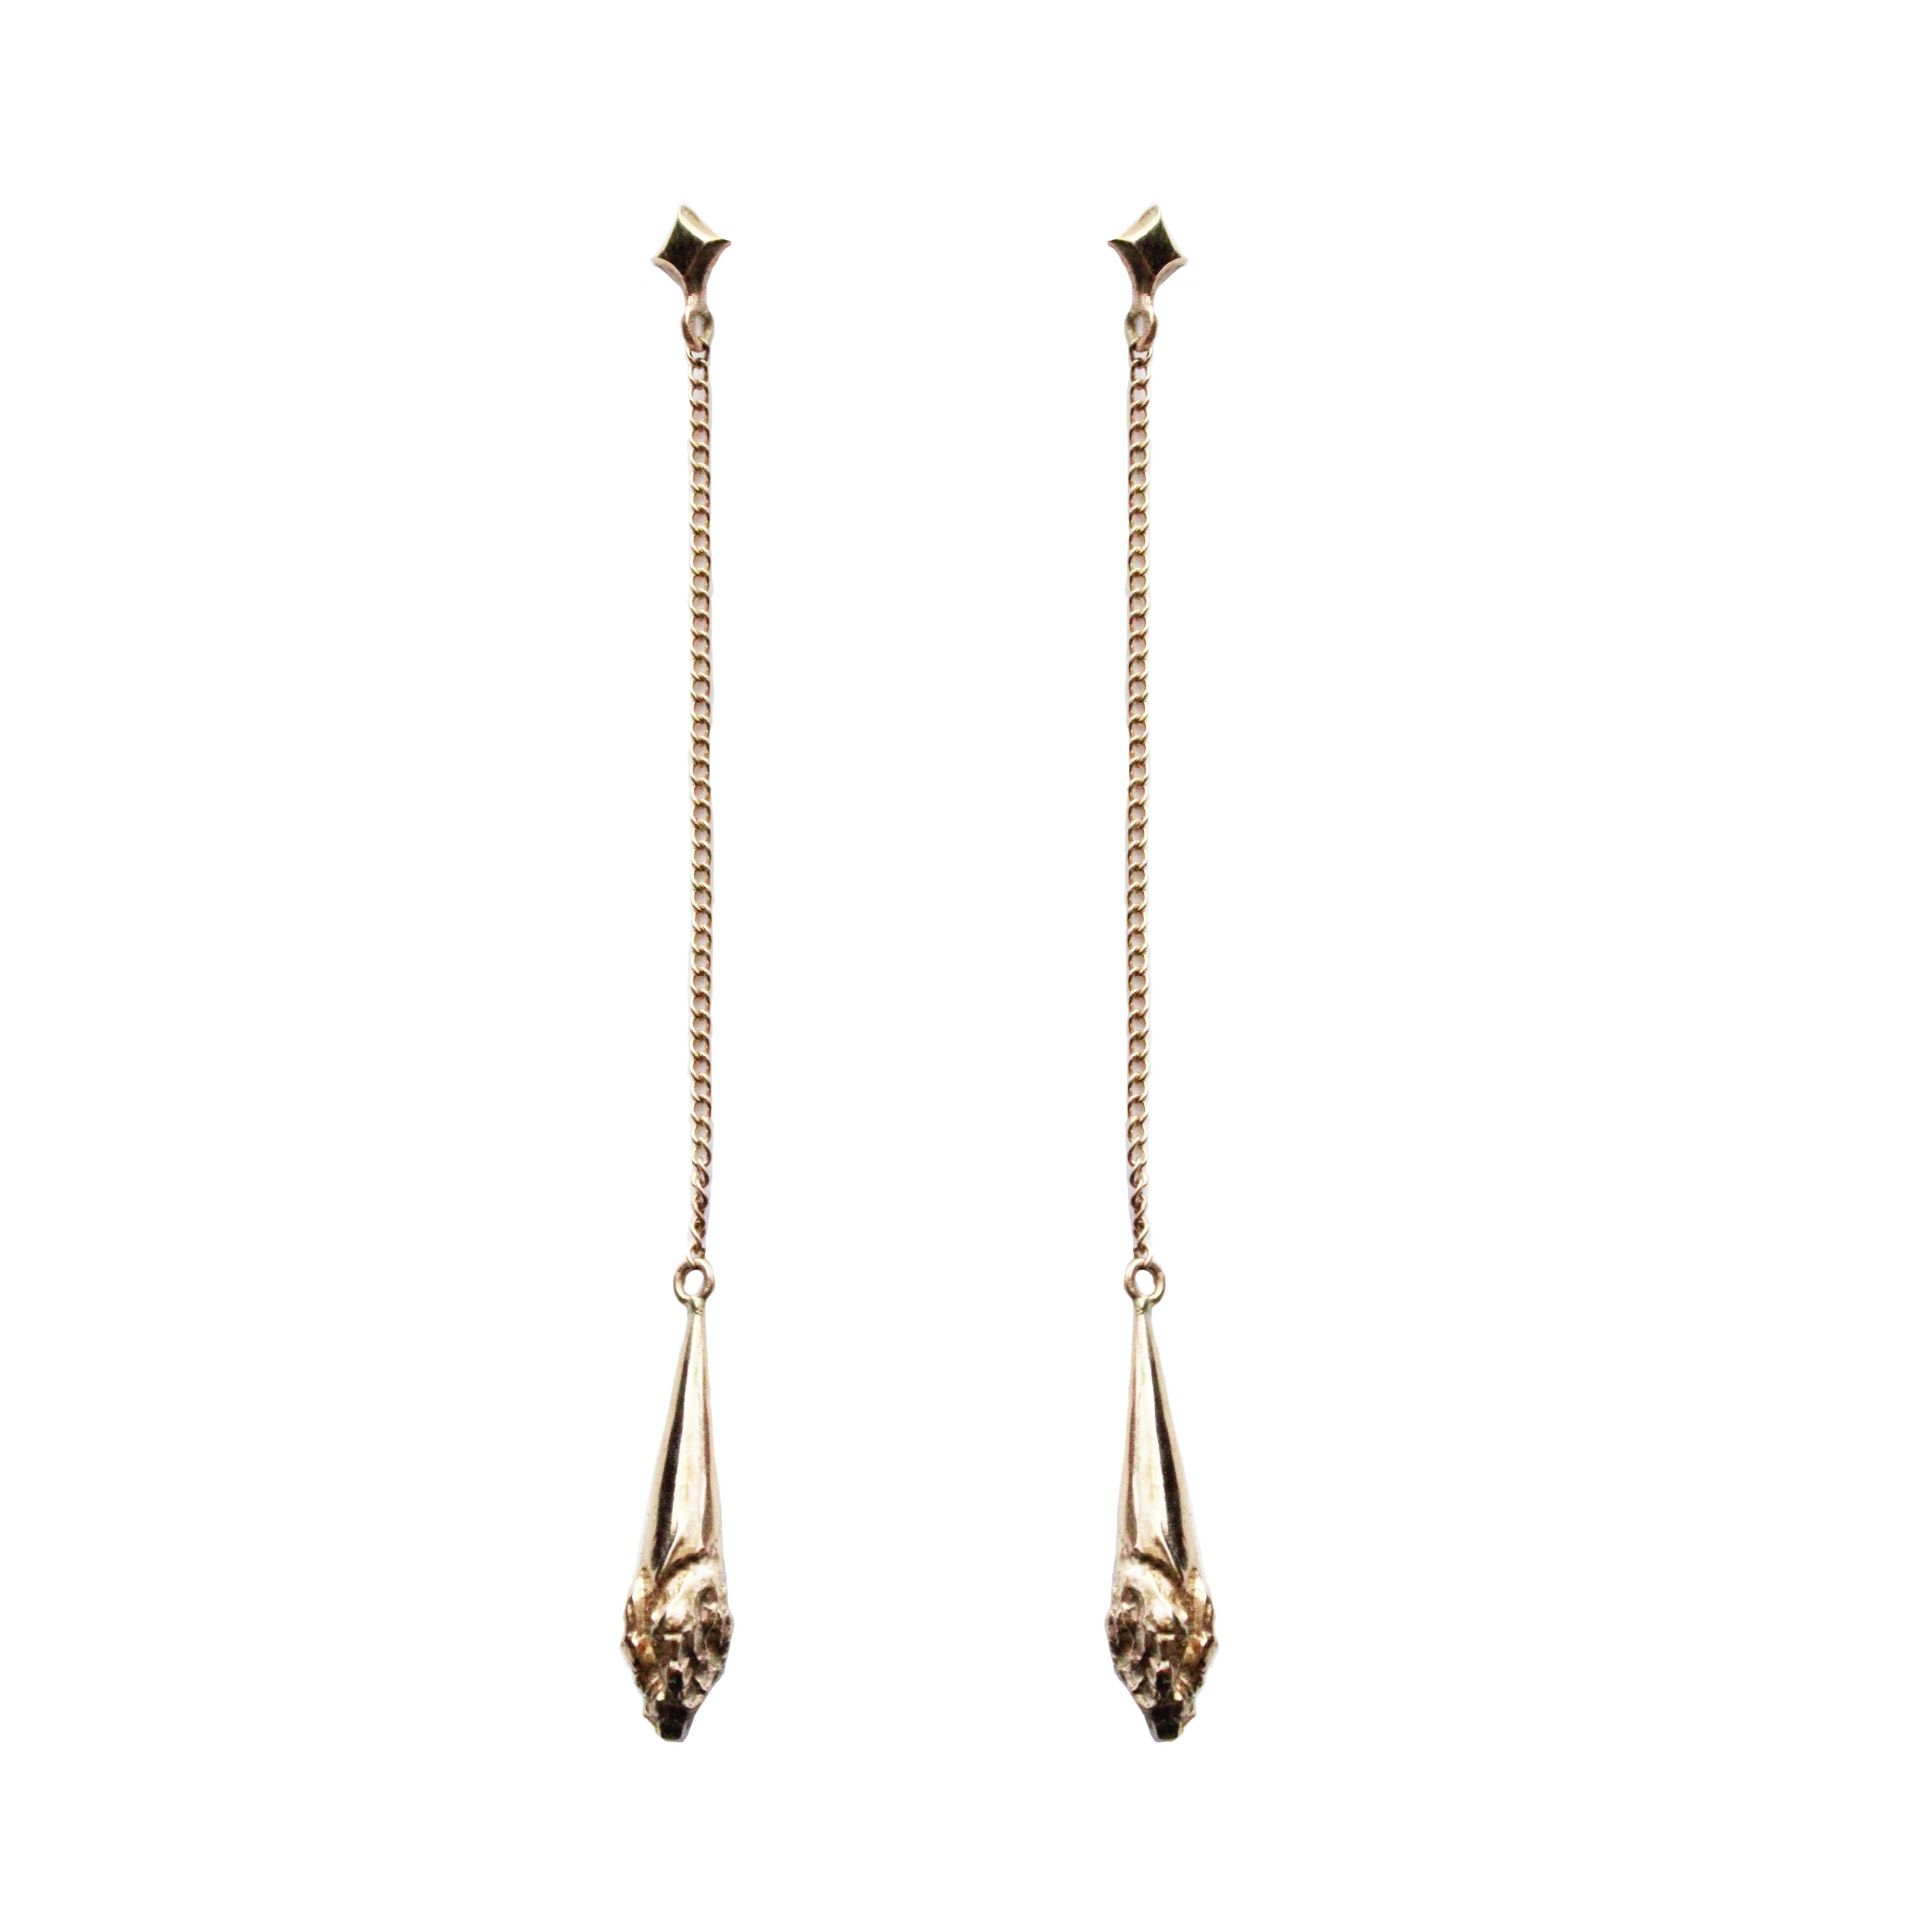 Gorgeous drop earrings cast in 14K gold on a 2.5 inch gold chain that dangles from a kite shape stud. These earrings have a wonderful movement and silhouette that falls mid neck. This pair is unique, highlighting a textured drop of solid gold. The